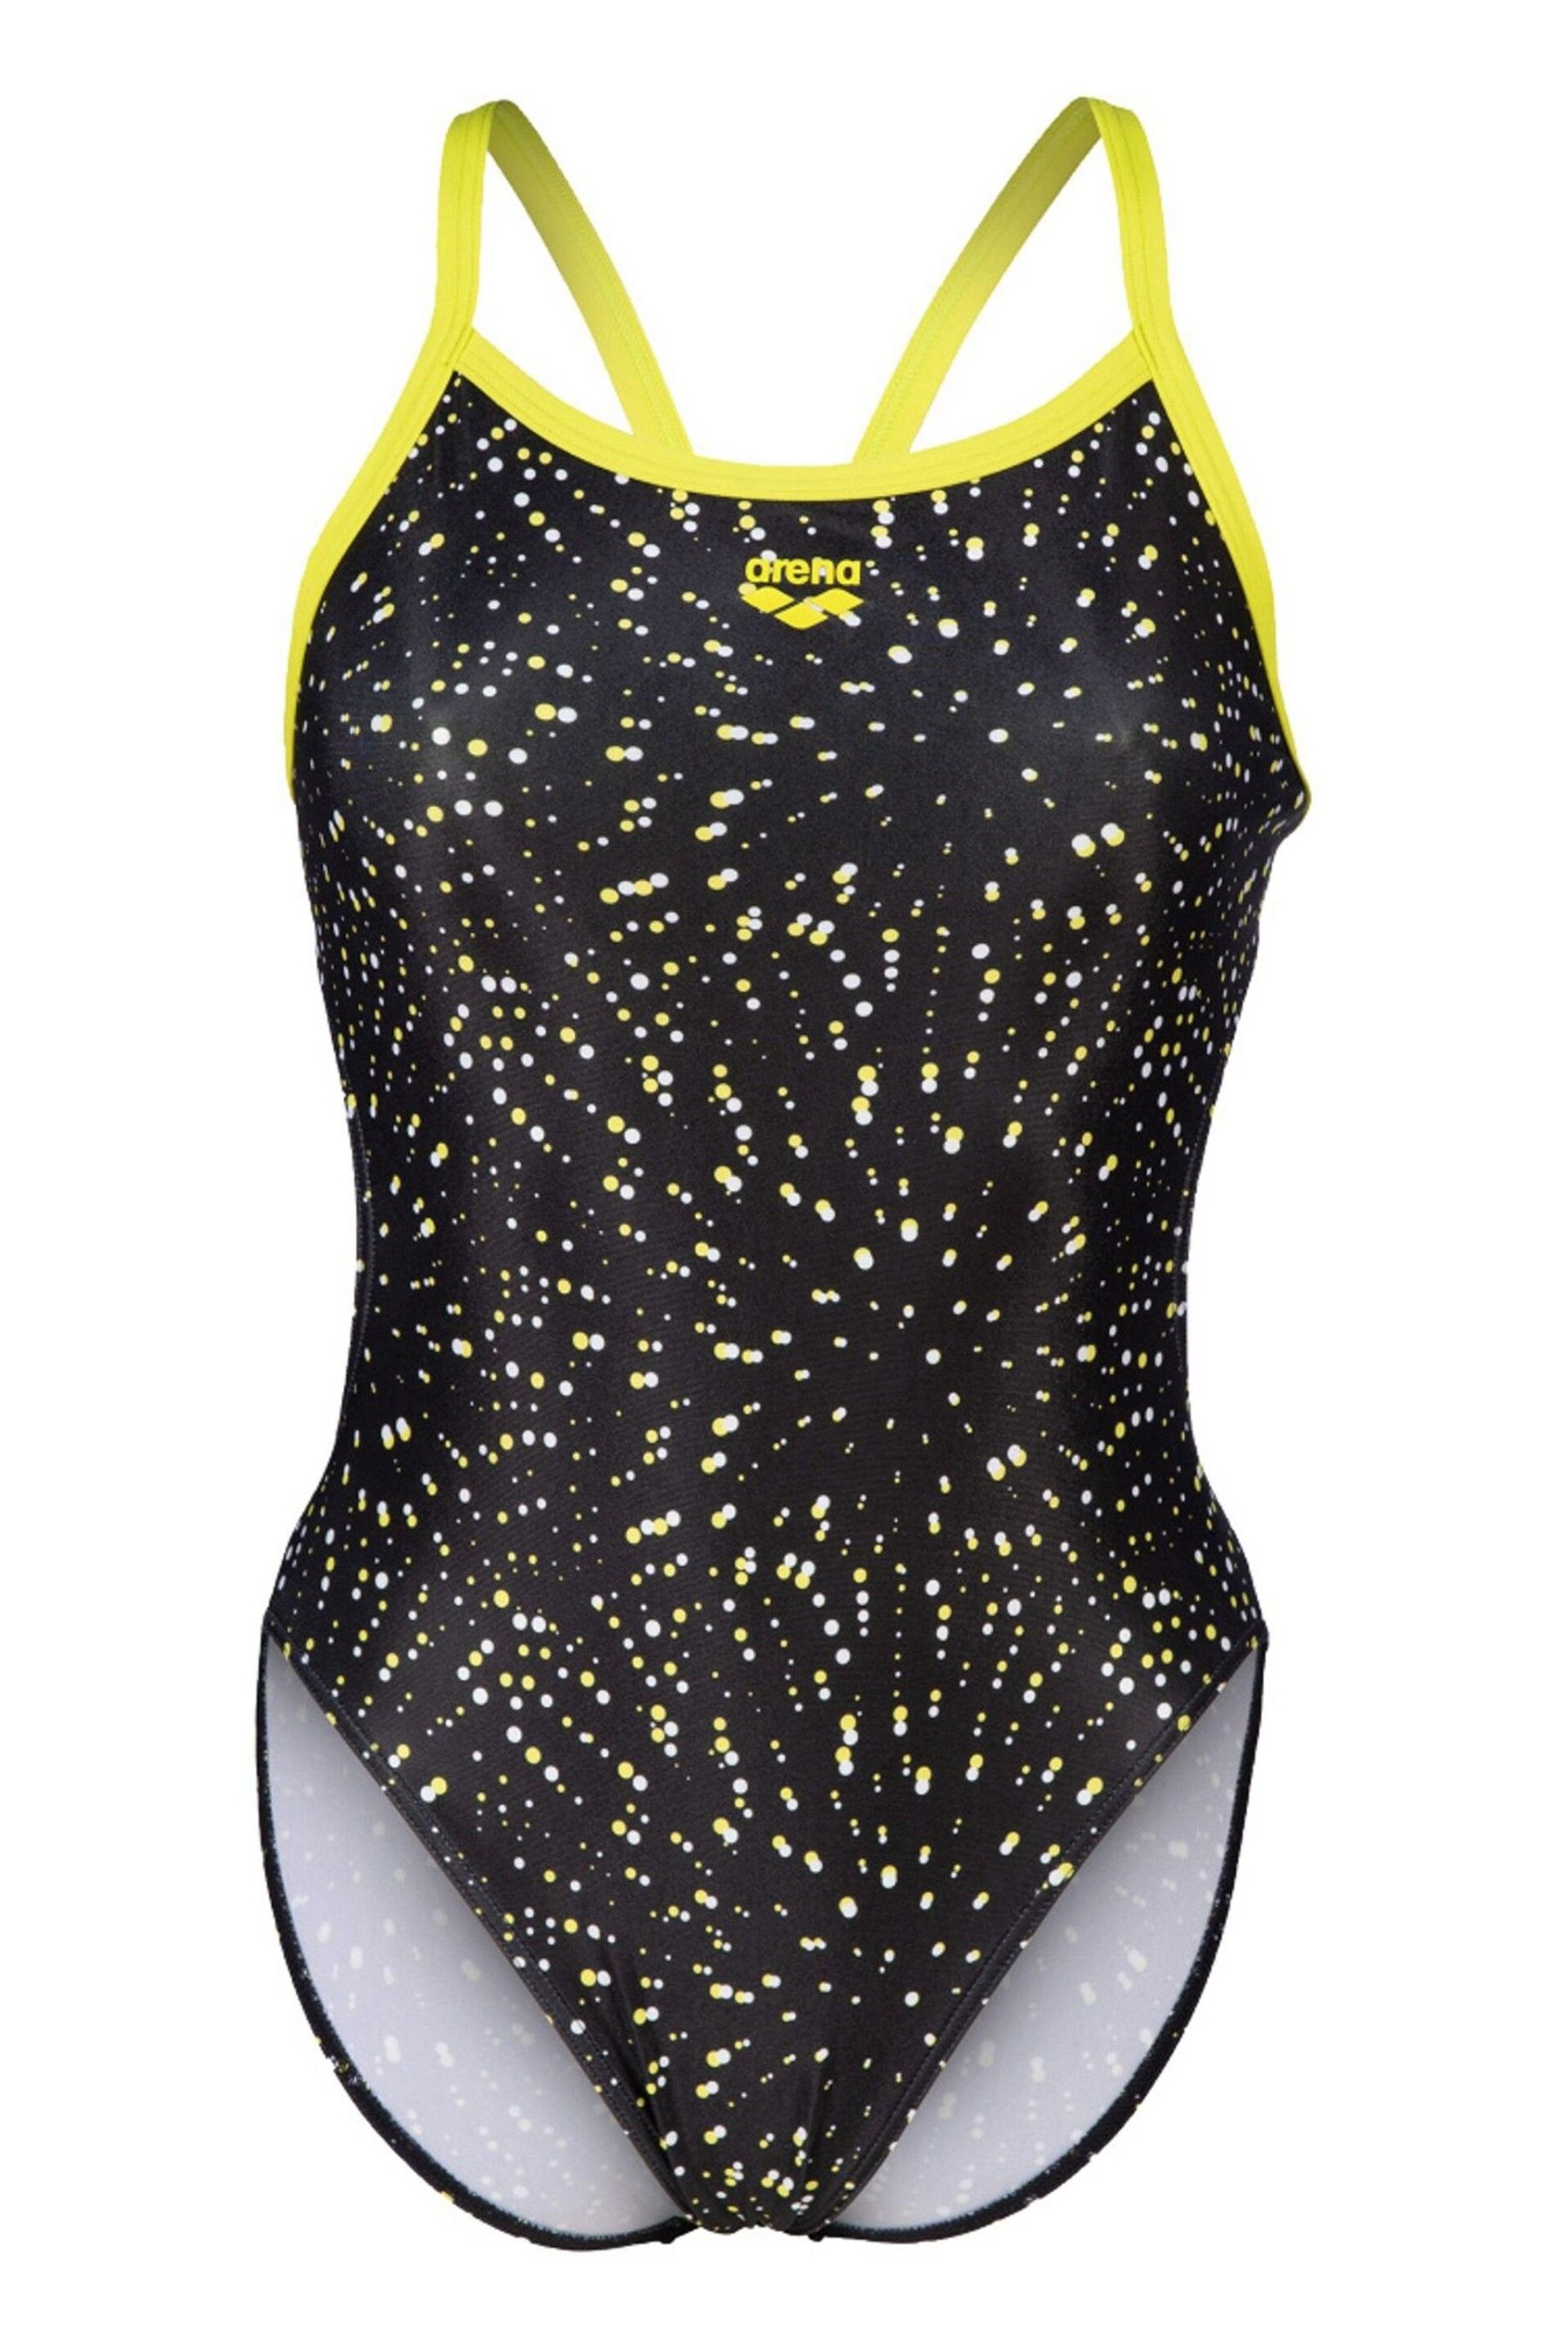 Arena Womens Fireworks Challenge Black Swimsuit - Image 6 of 9